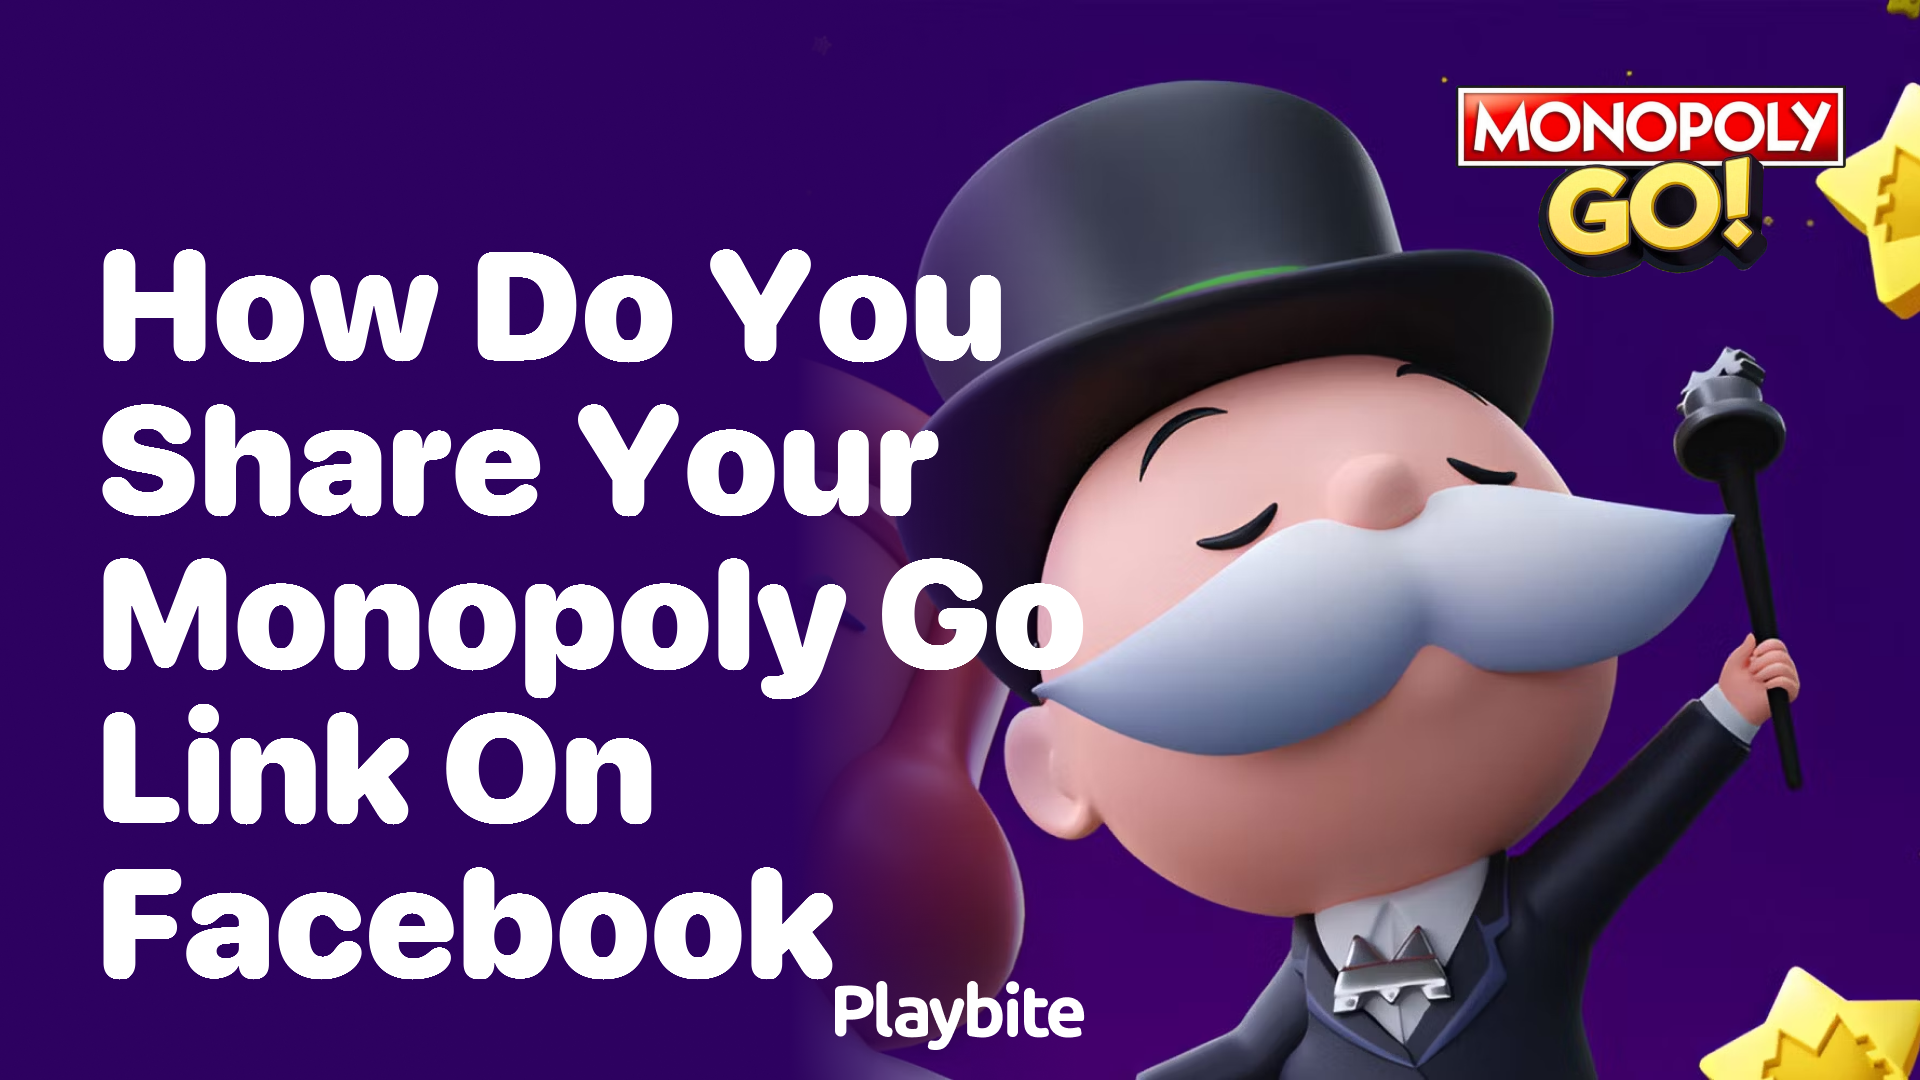 How Do You Share Your Monopoly Go Link on Facebook?